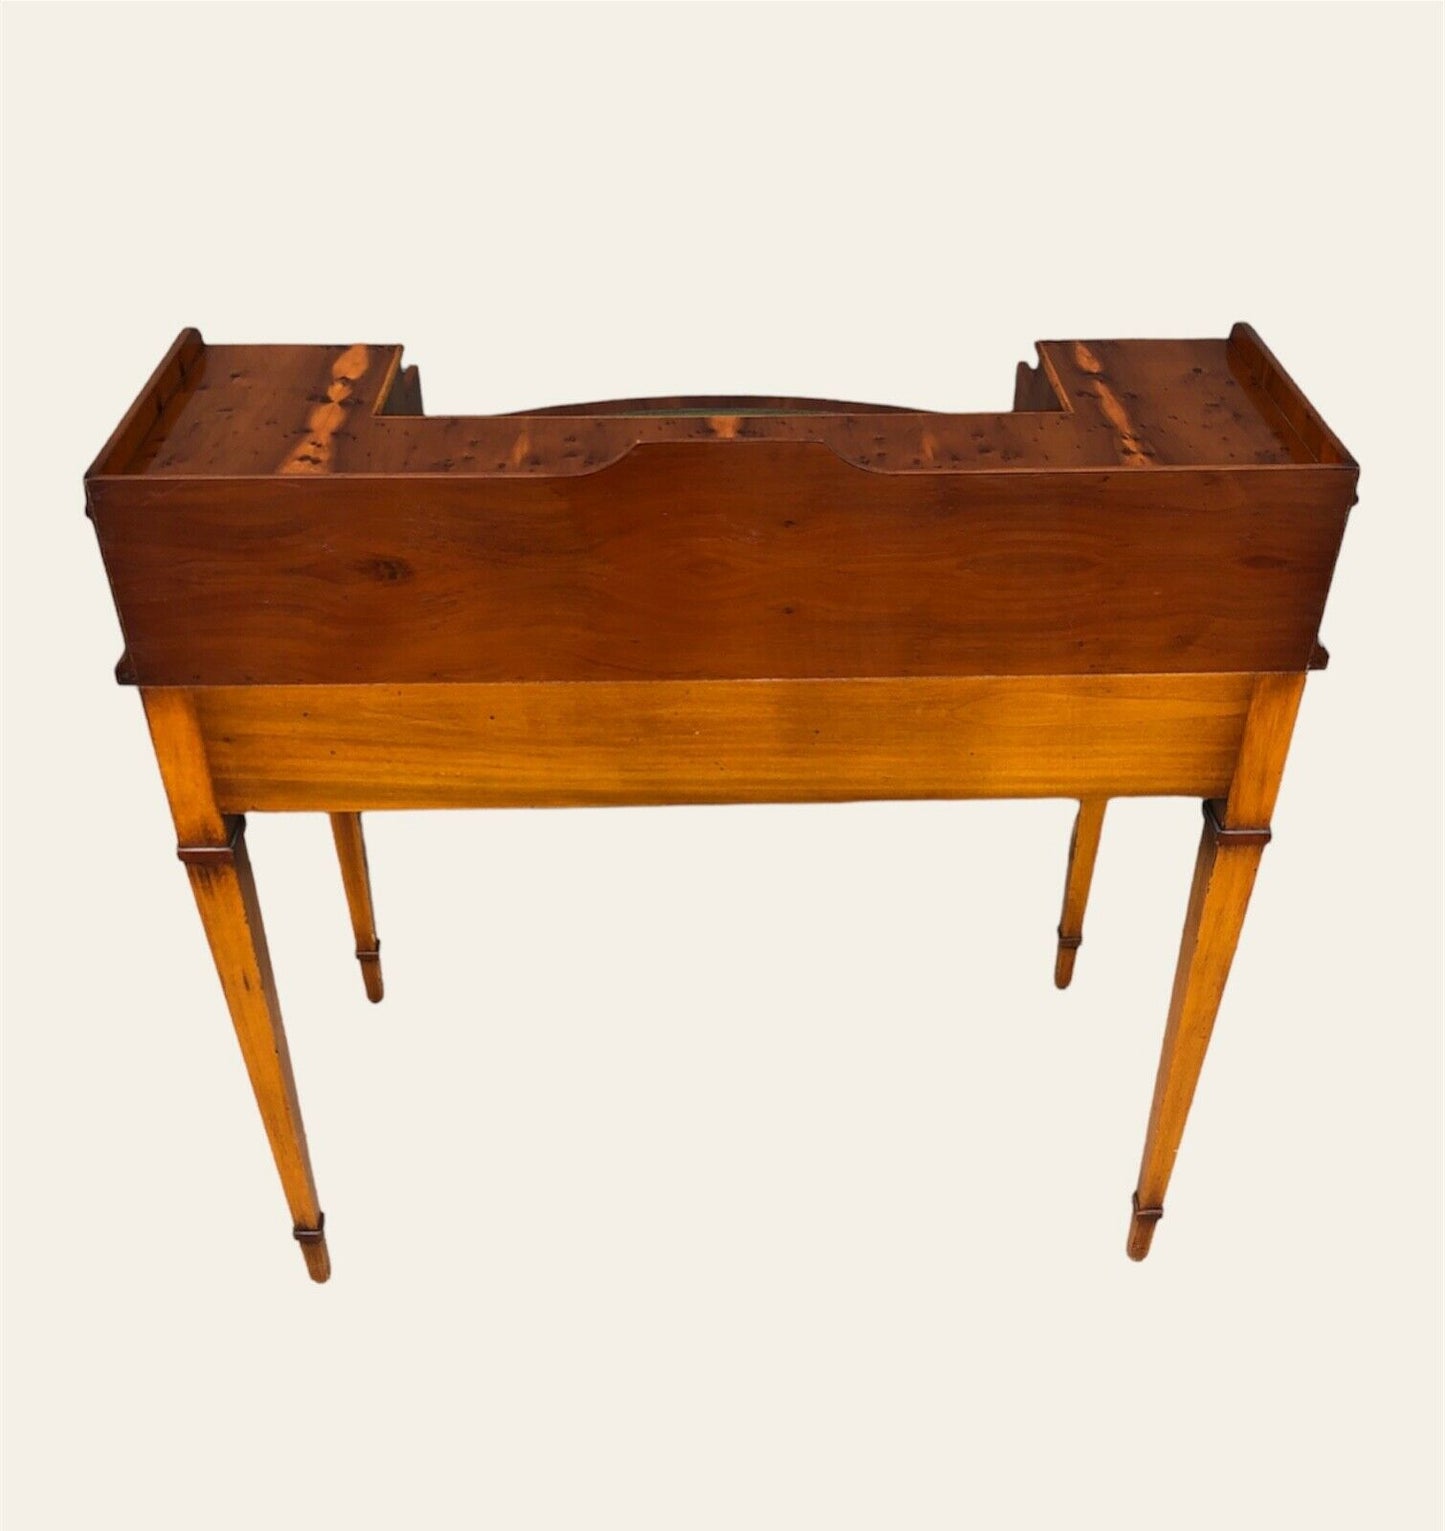 000954....Handsome Vintage Yew Wood Writing Desk